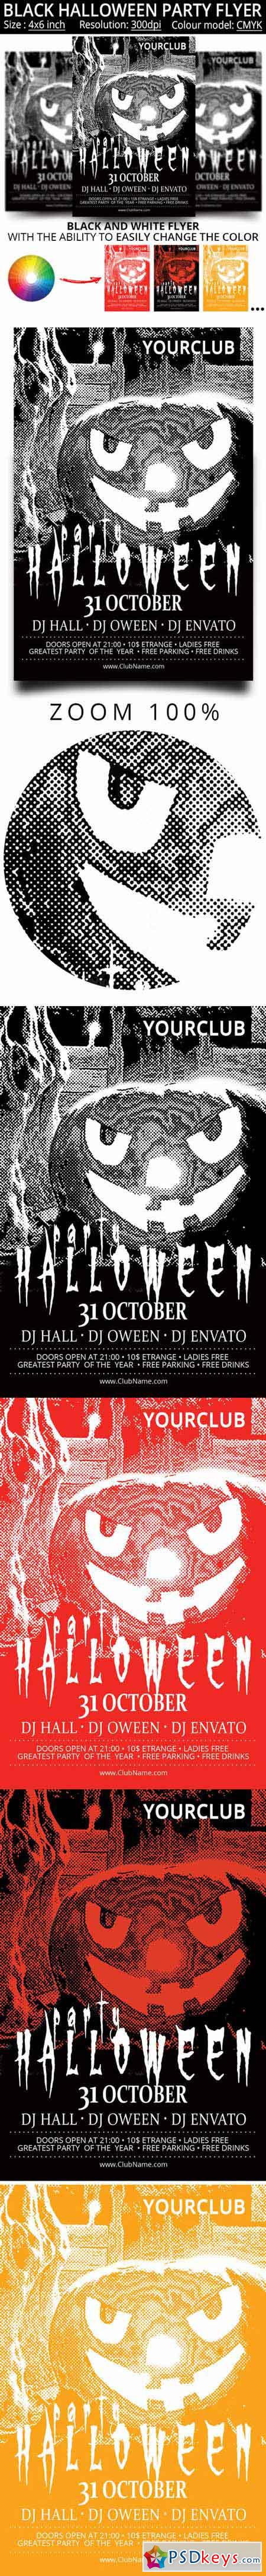 Black and white flyer for the Hallow 362875